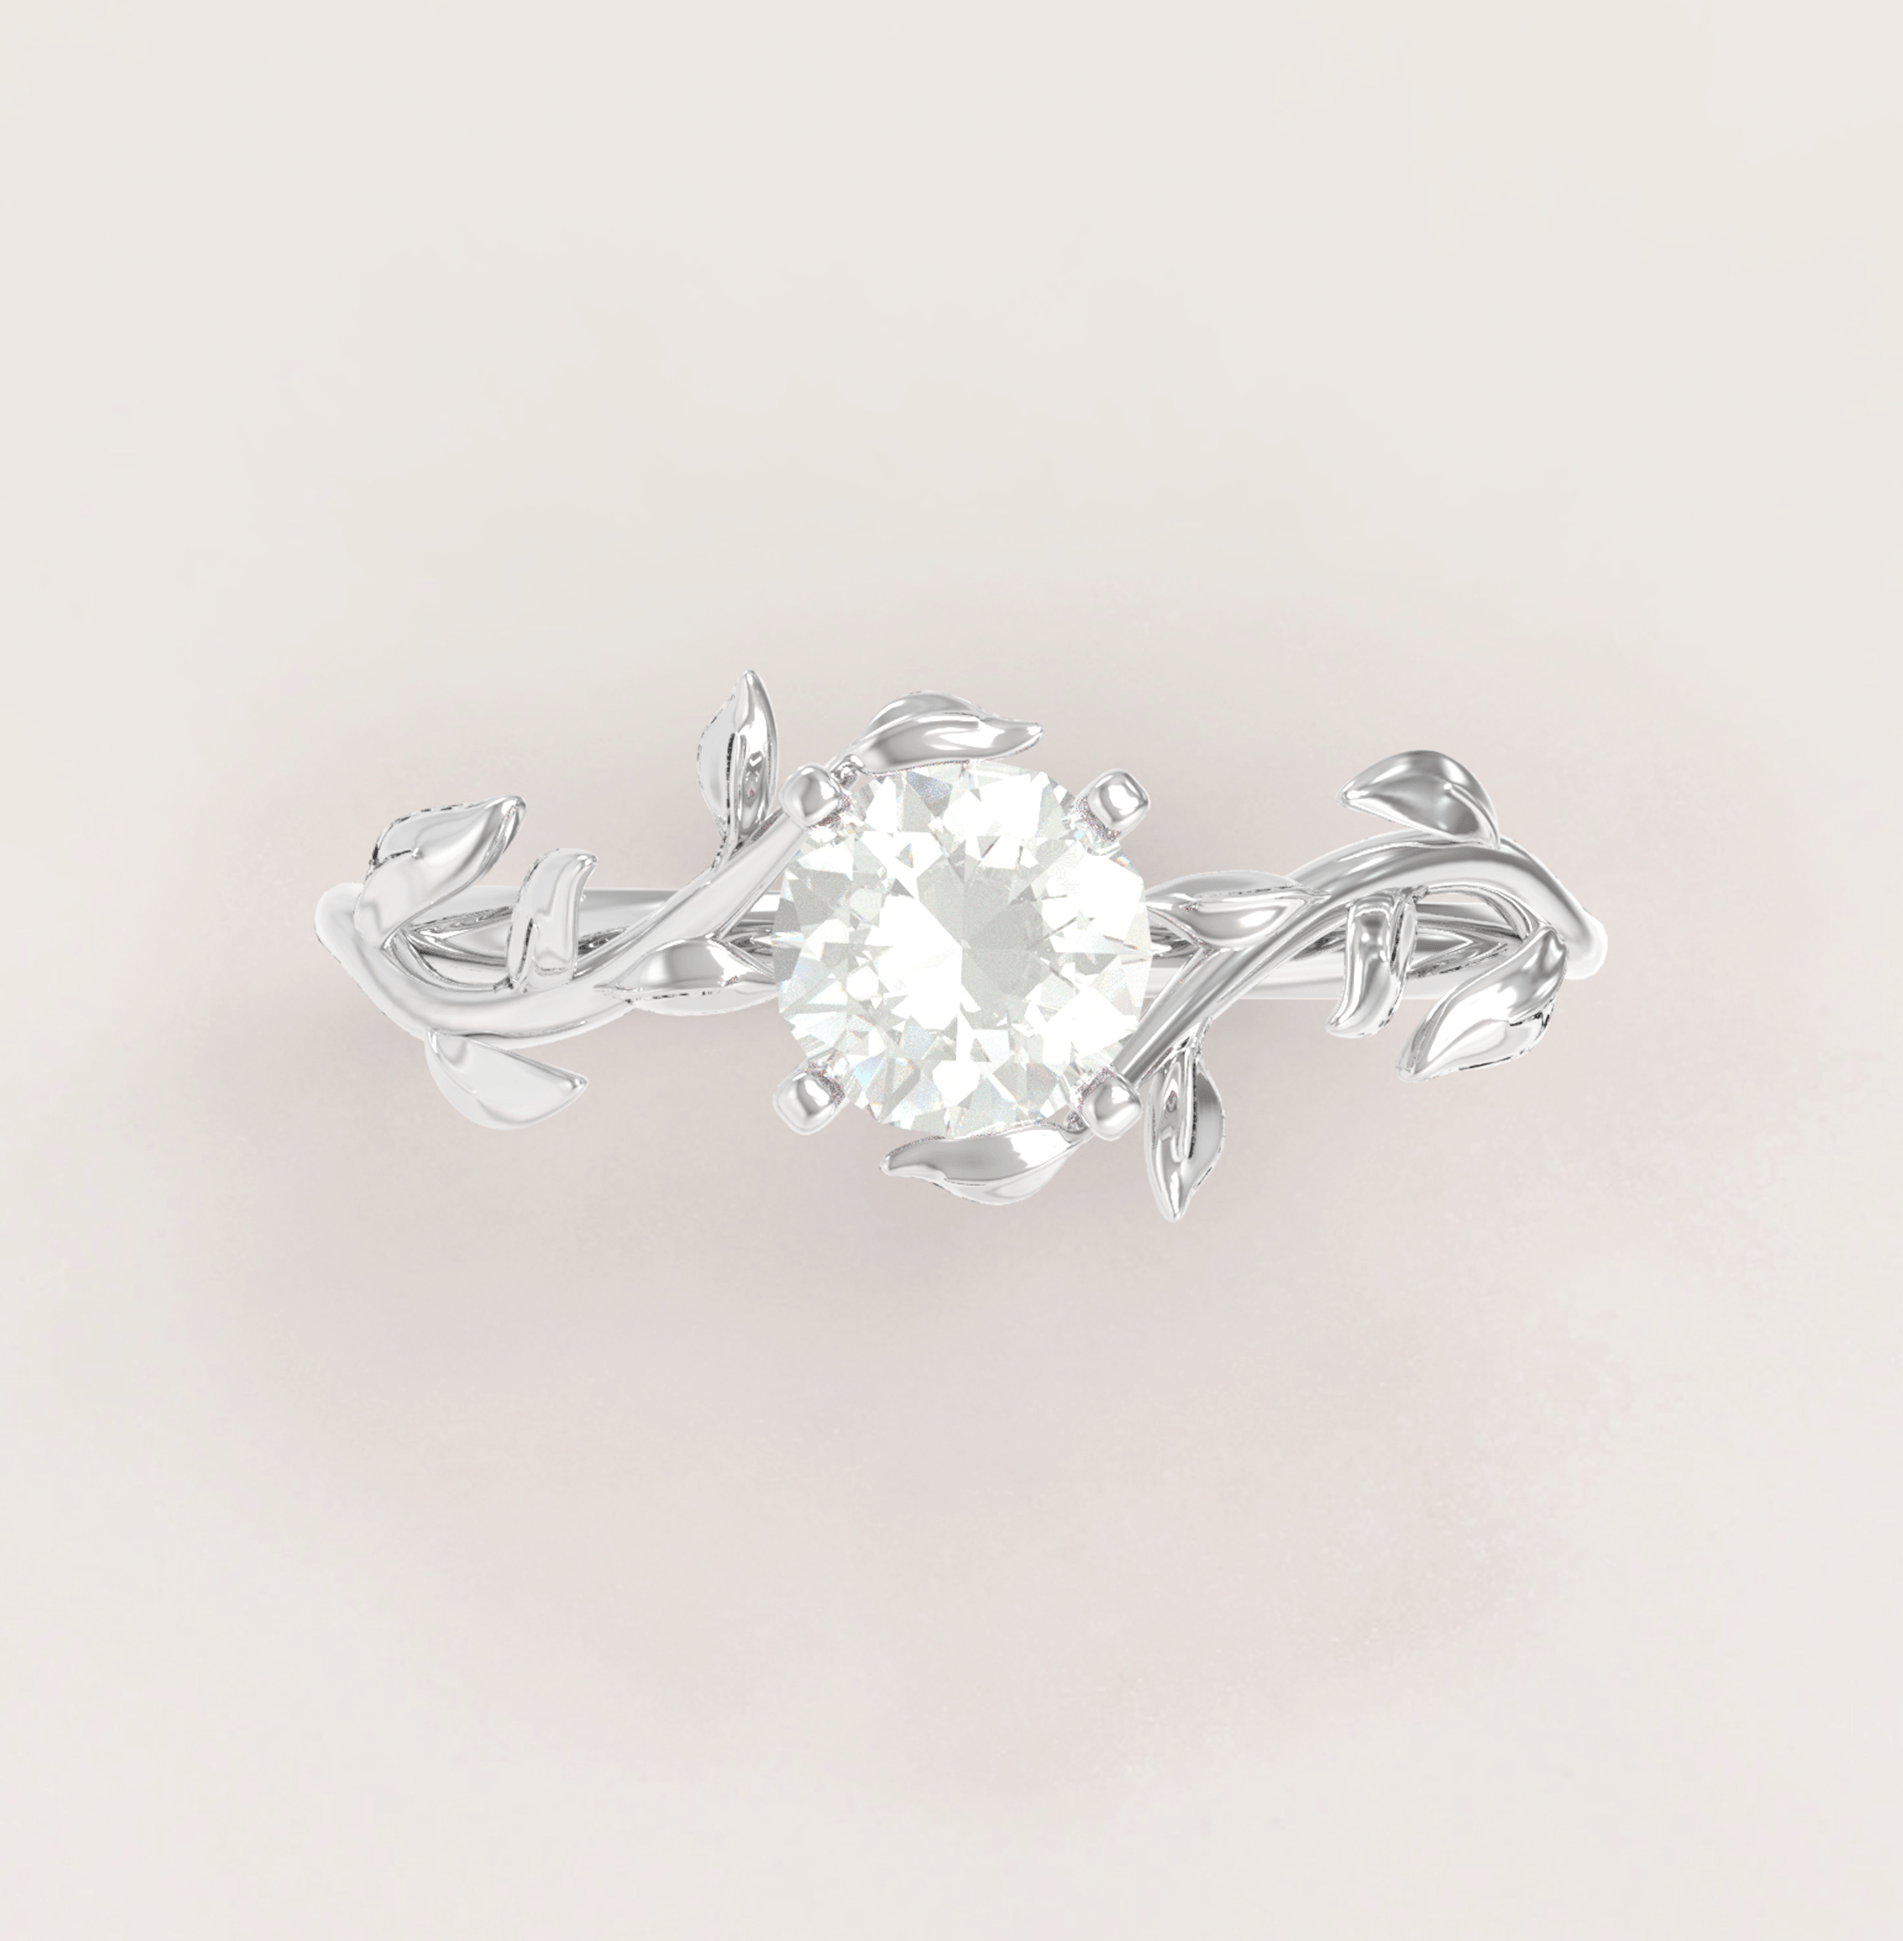 Unique Leaves Engagement Ring No.5 in White Gold - Moissanite/Diamond - Roelavi